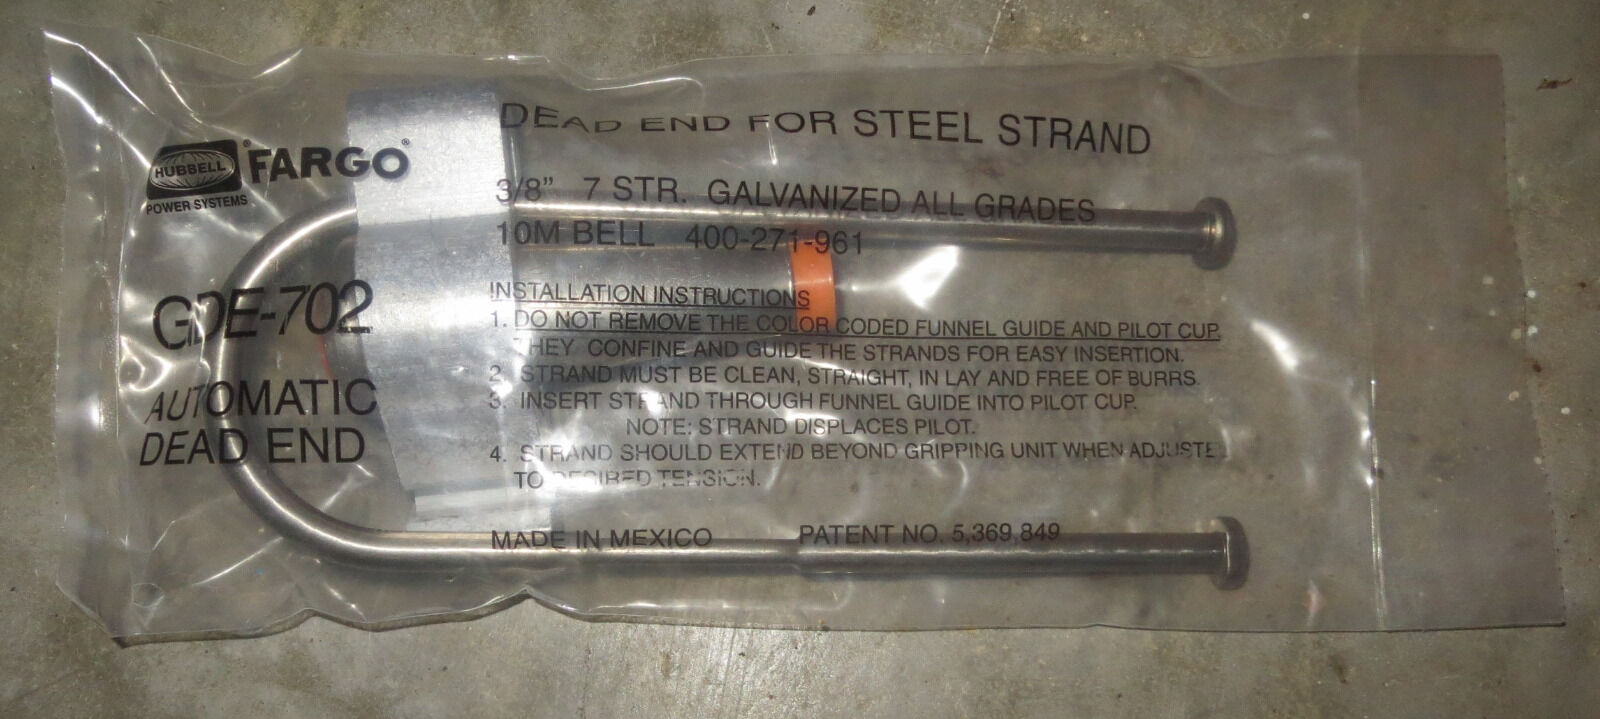 Hubbell/Fargo GDE-702 10M strandvise automatic guy wire dead end 3/8\